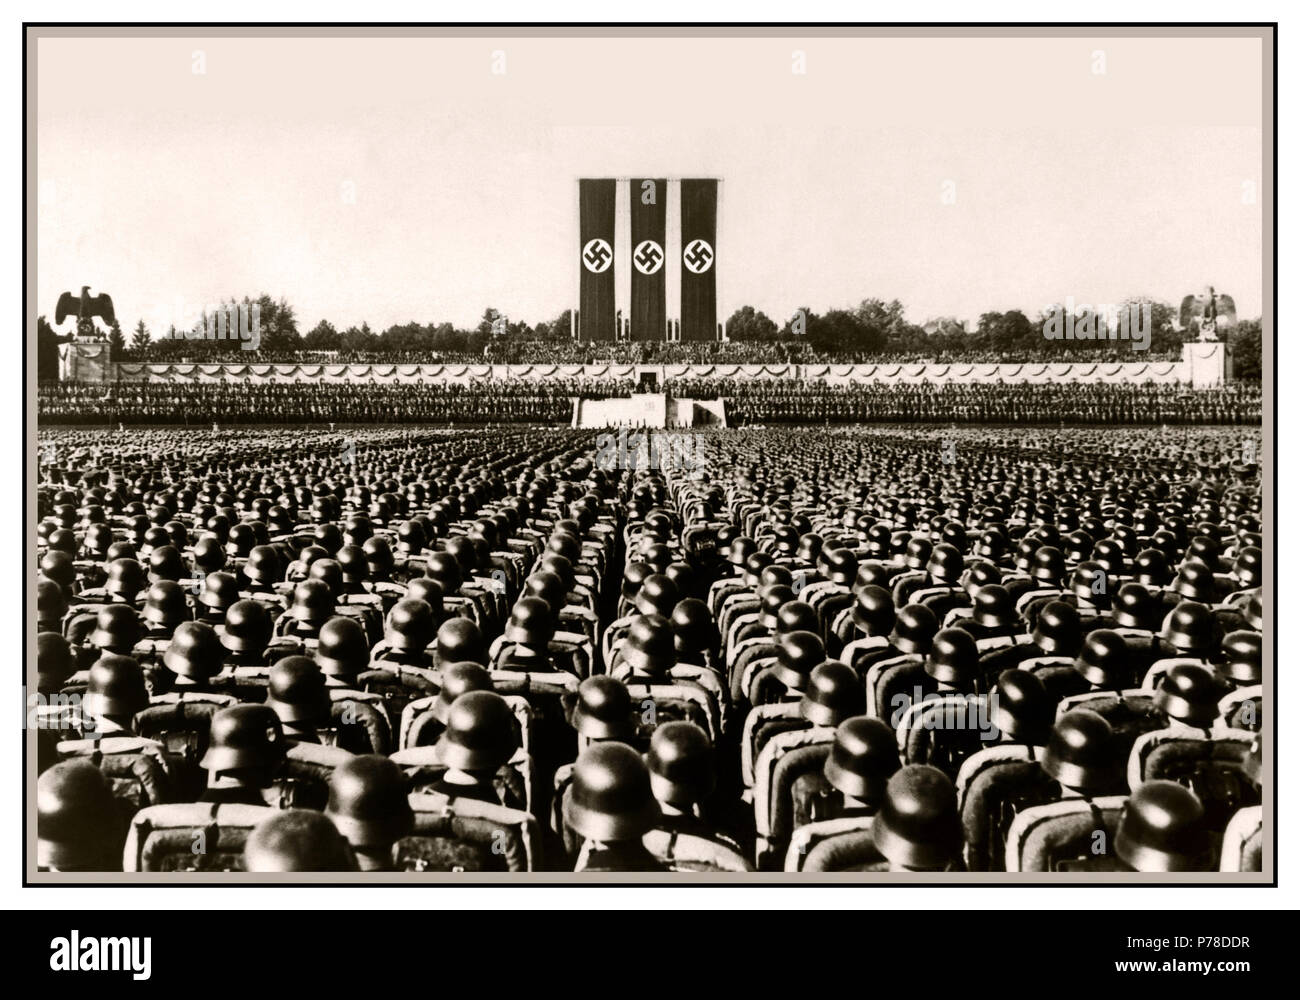 Nuremberg 1930's Waffen SS troops wearing polished helmets in precise serried ranks standing at salute during a German Nazi rally pre-World War II with large Swastika banners dominating arena Stock Photo